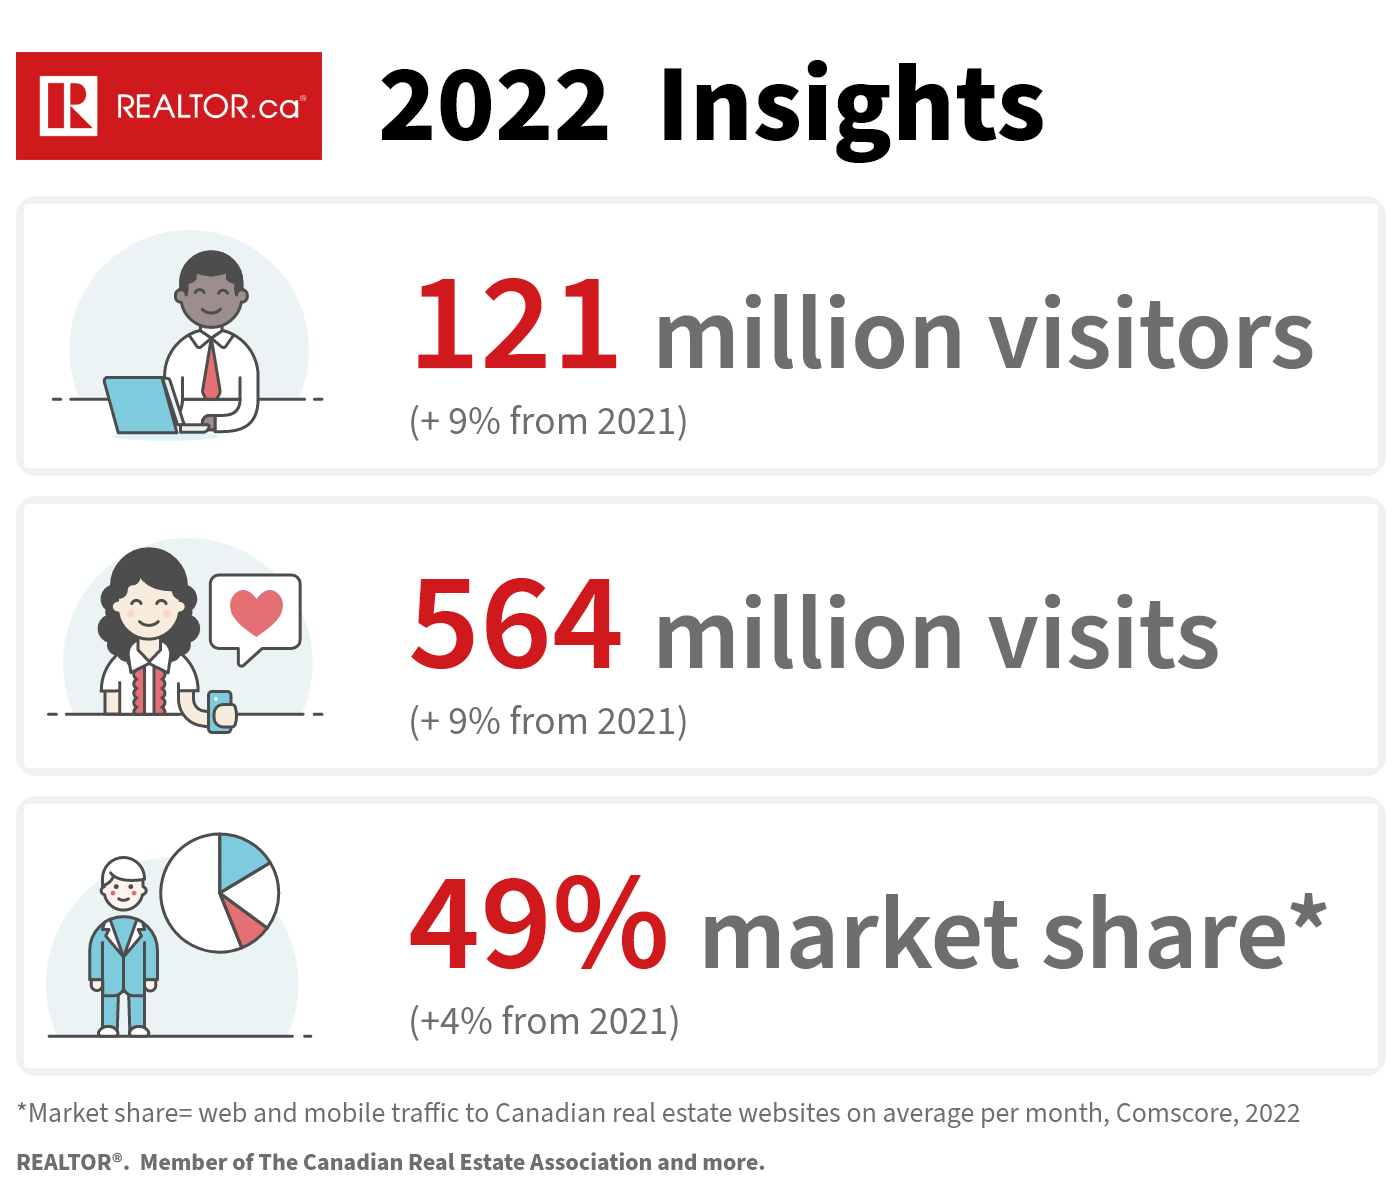 In 2022, REALTOR.ca received 121 million visitors, 564 million visits, and had 49% market share.